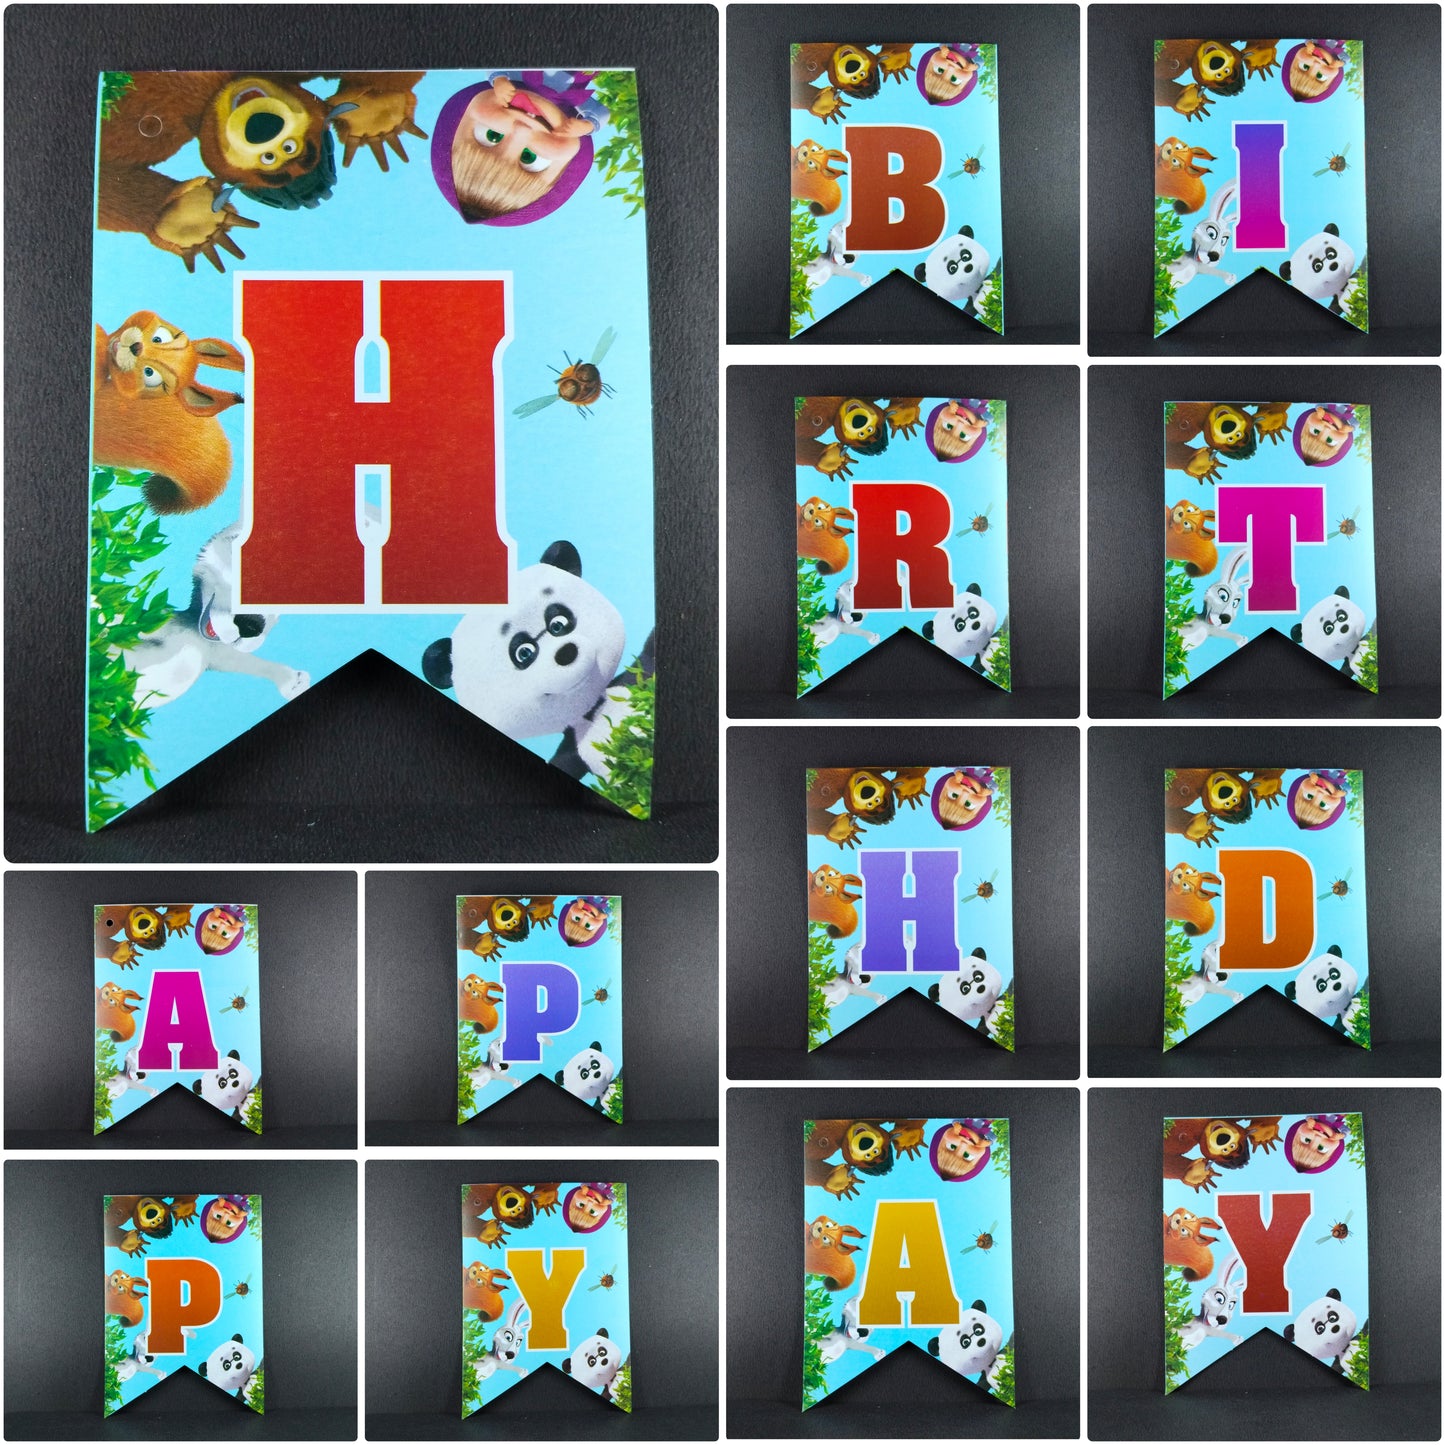 Birthday Decoration Kit - Masha and Bear Theme for Simple Birthday Decorations at Home